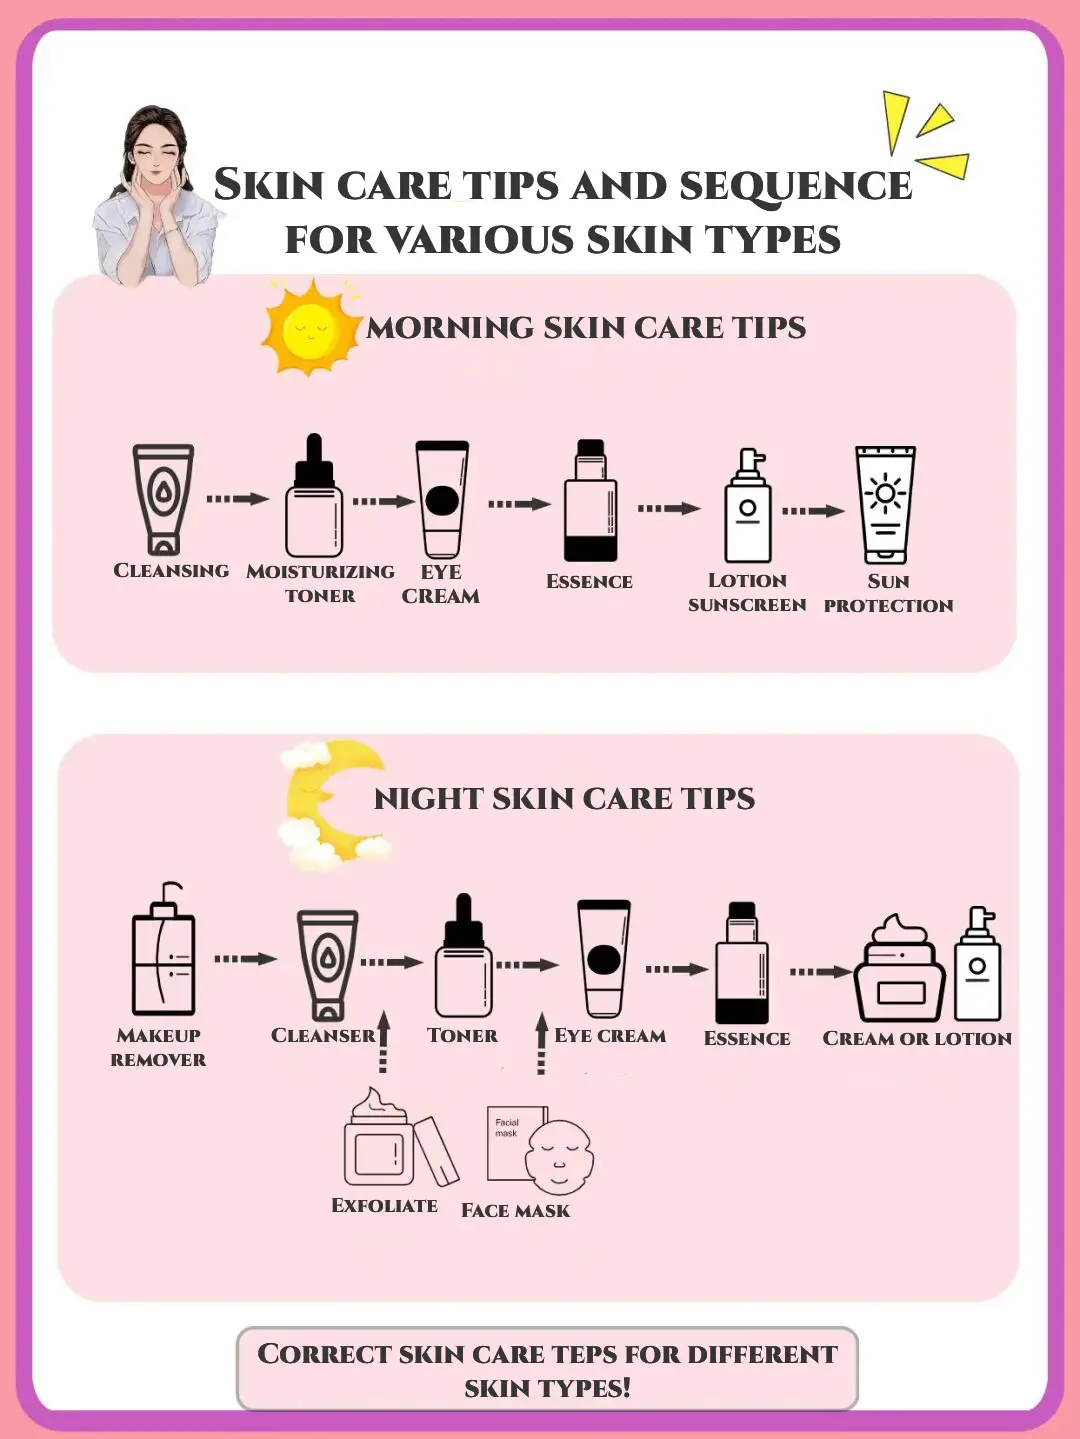 Skin care tips and sequence for various skin types's images(0)